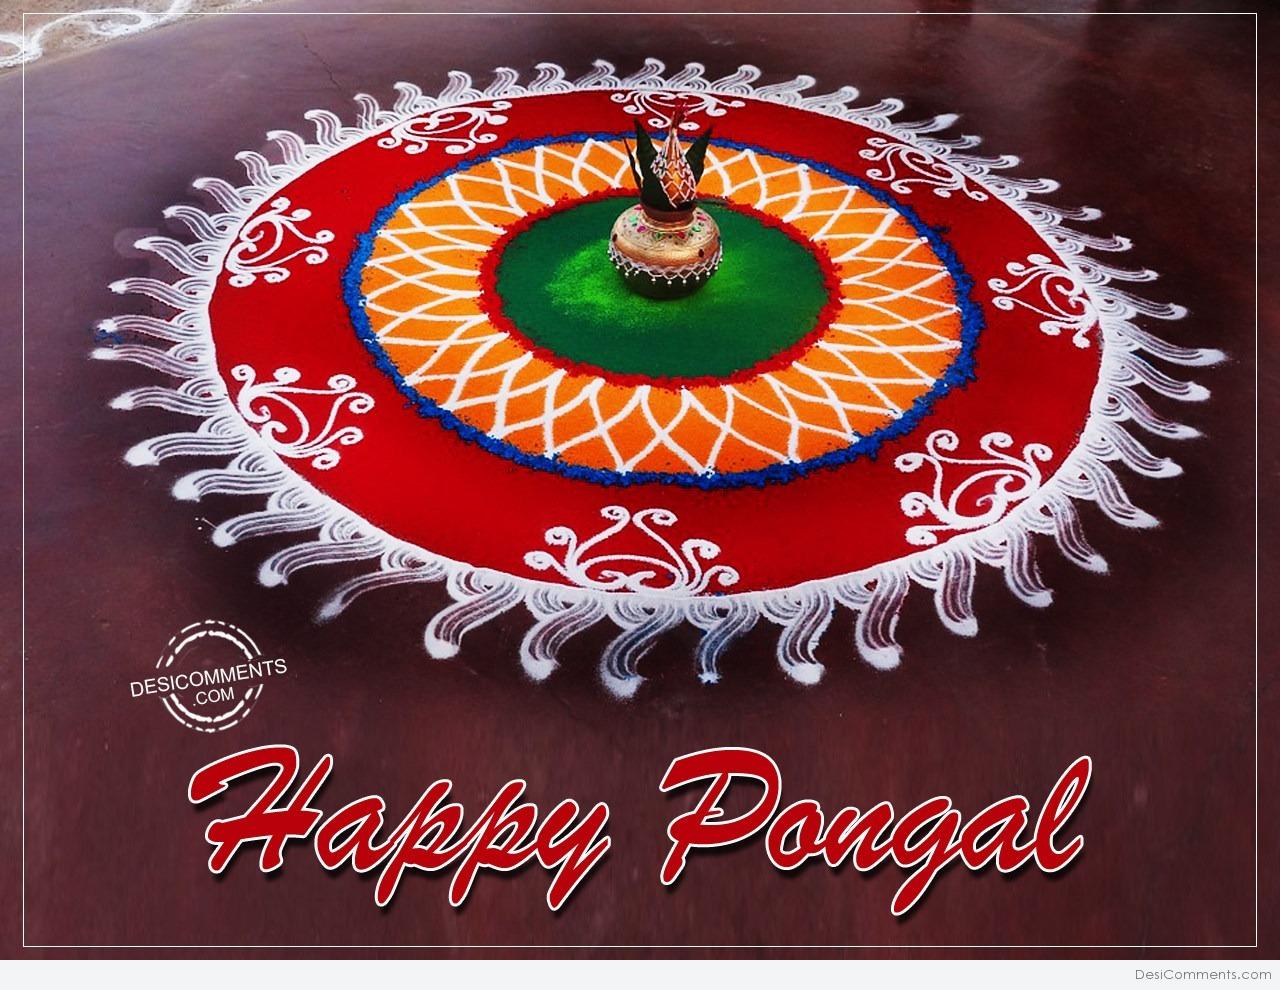 80+ Pongal Images, Pictures, Photos - Page 2